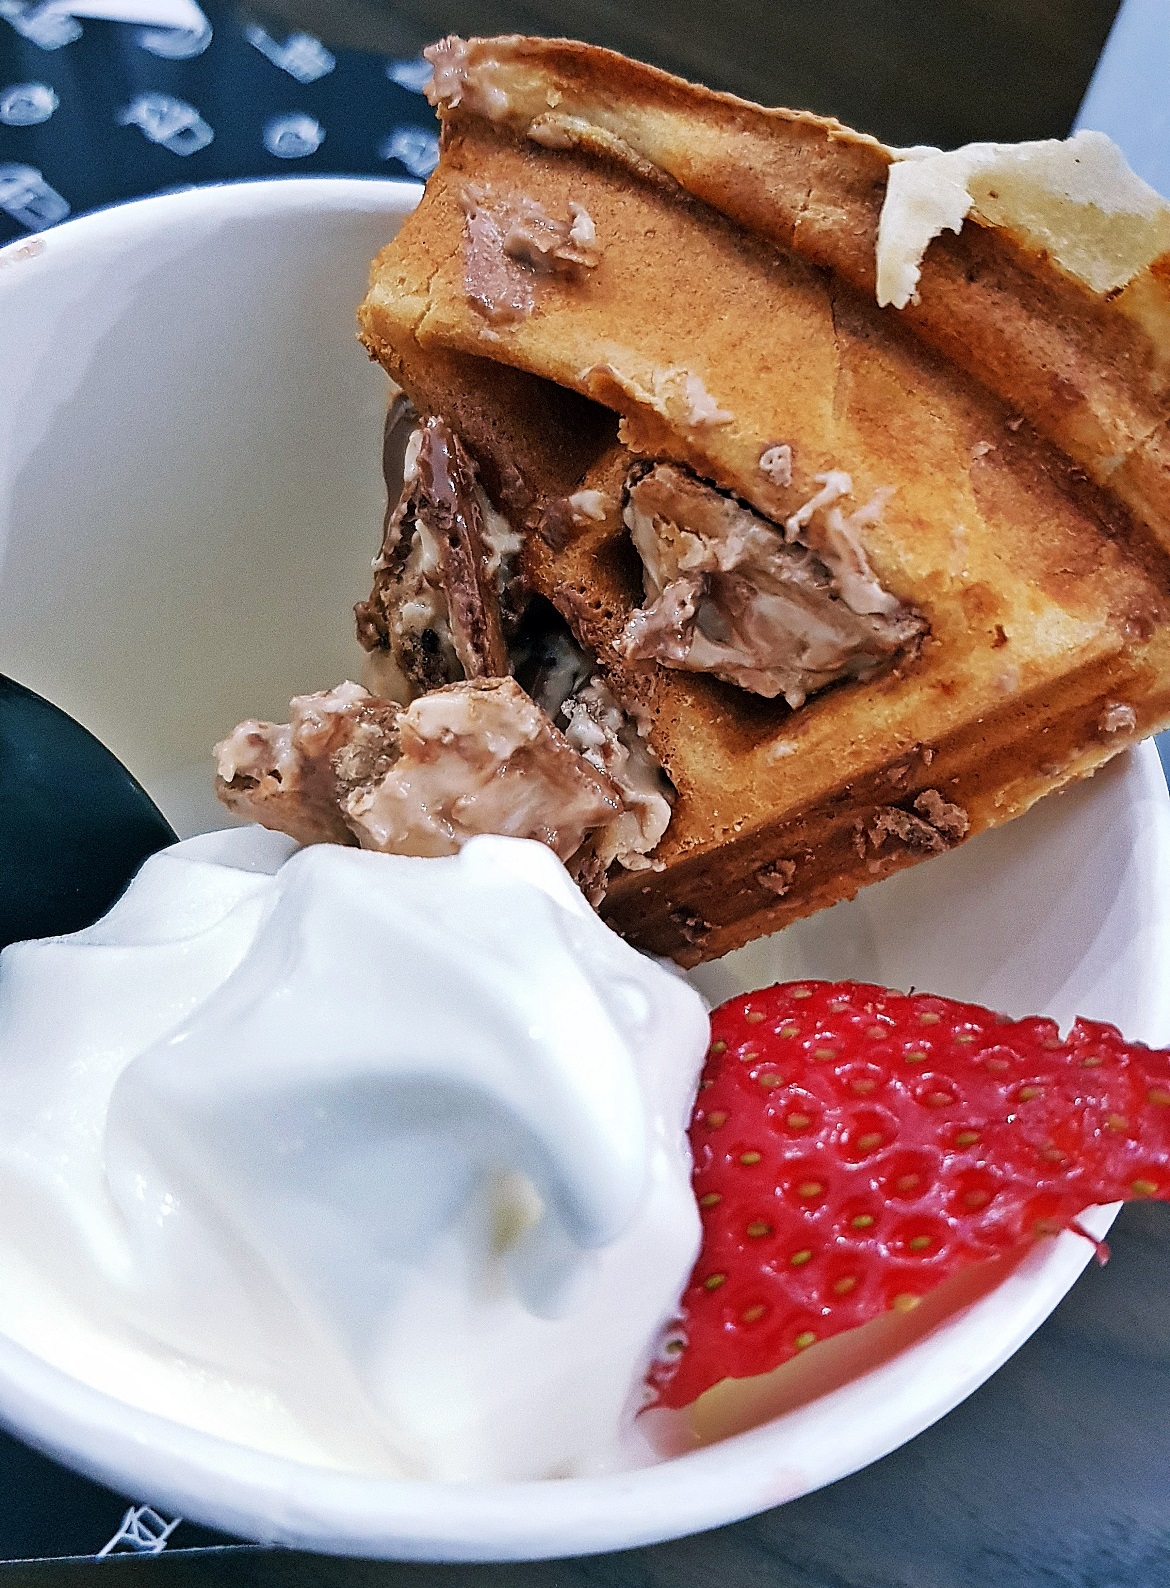 Waffles at Treat - March 2018 Monthly Recap by BeckyBecky Blogs